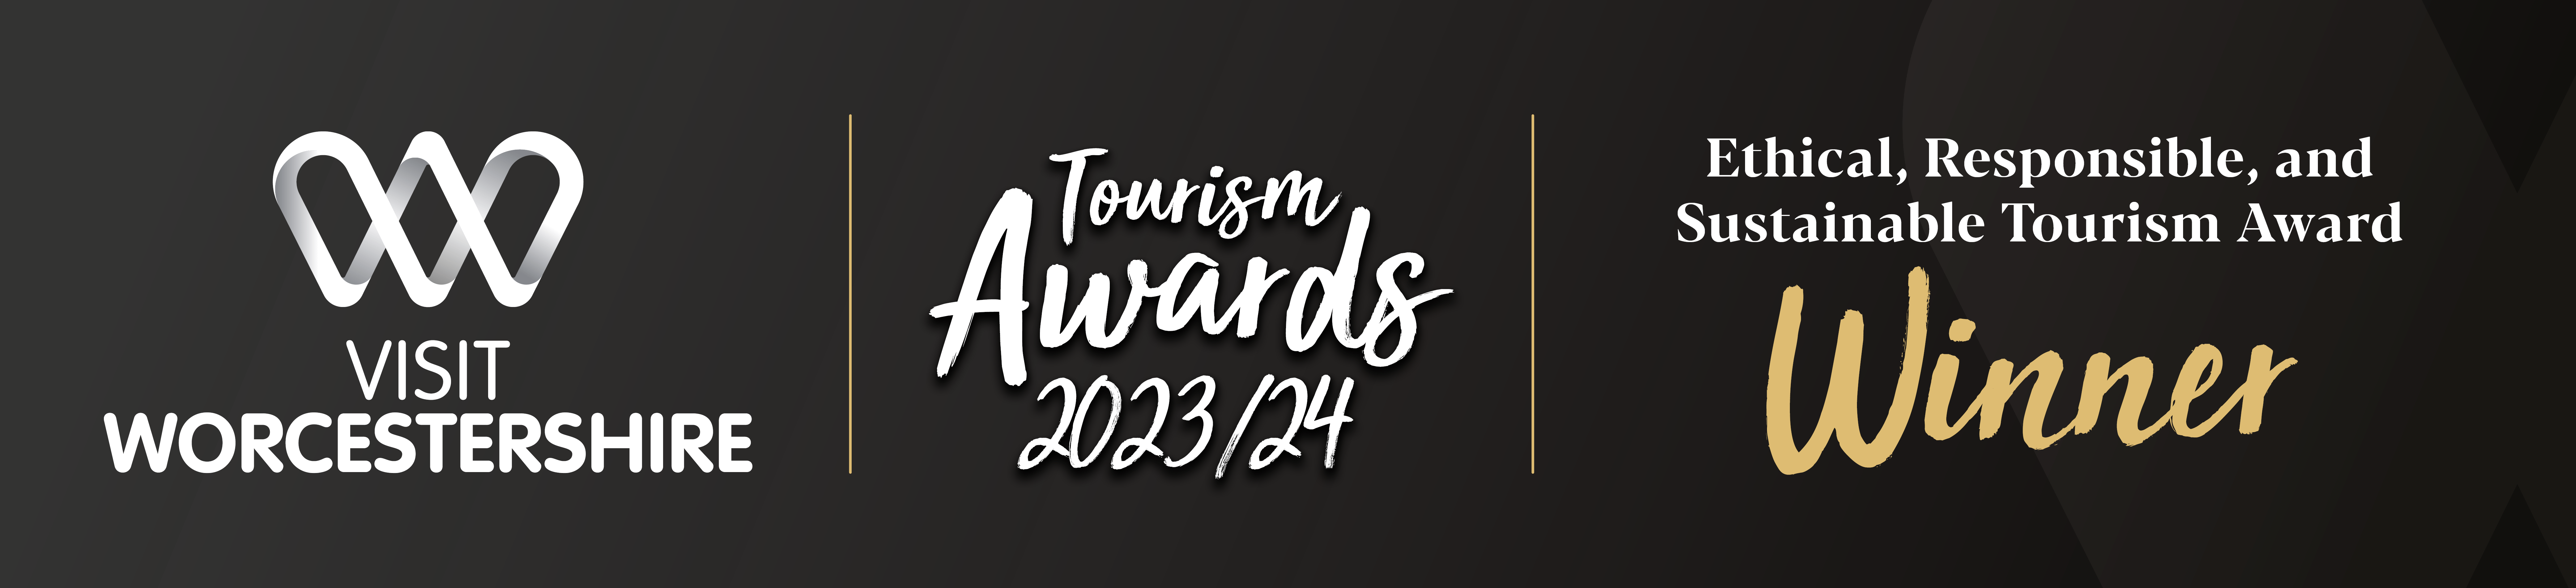 VW Tourism Awards Winners 2023-24 Ethical-Responsible-Sustainable (1)